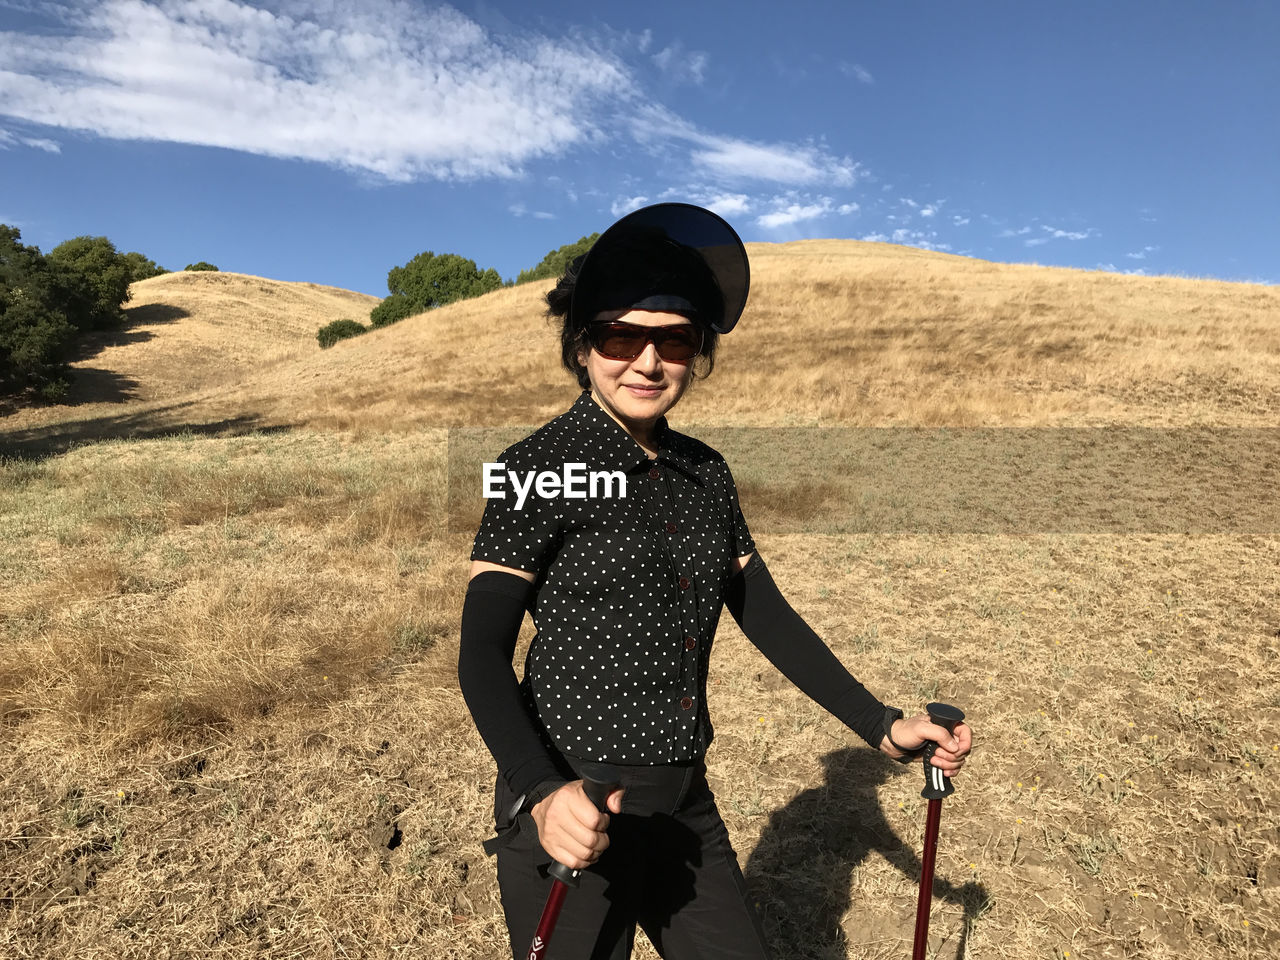 Portrait of young woman wearing sunglasses standing on grassy field at garin regional park